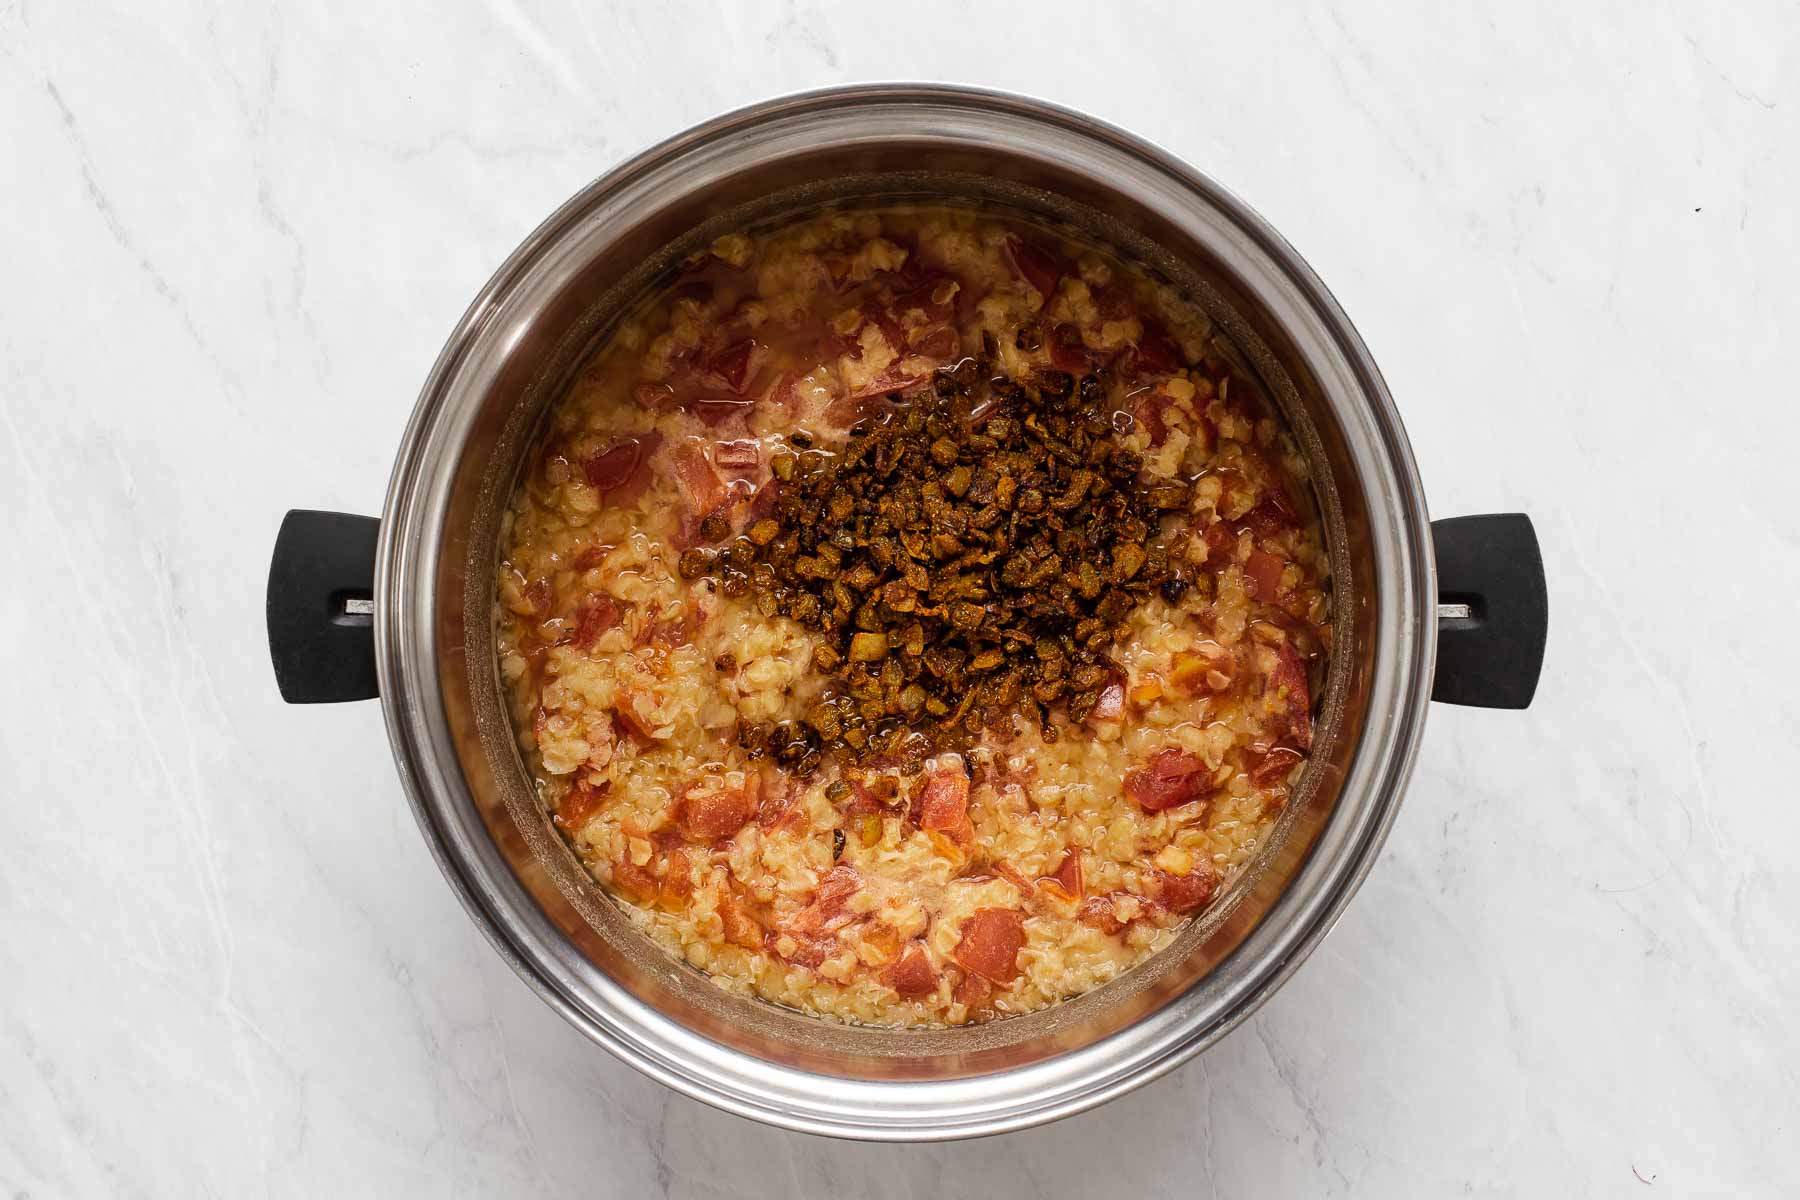 Stirring cooked golden brown onions into pot with cooked red lentils and tomatoes.